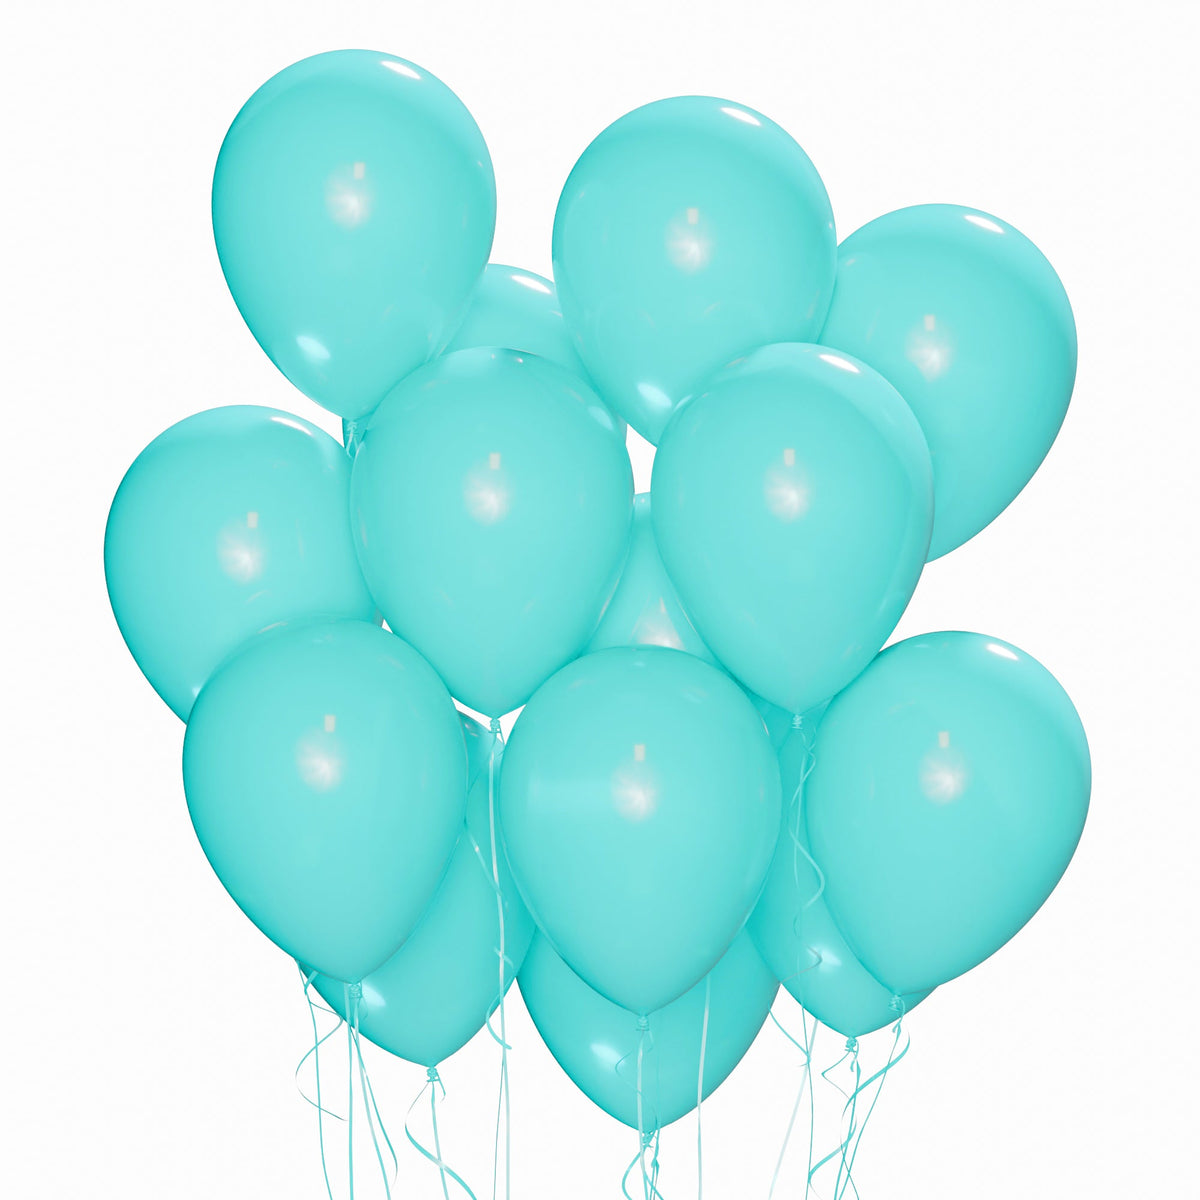 WIDE OCEAN INTERNATIONAL TRADE BEIJING CO., LTD Balloons Turquoise Latex Balloon 12 Inches, 72 Count 810064197840